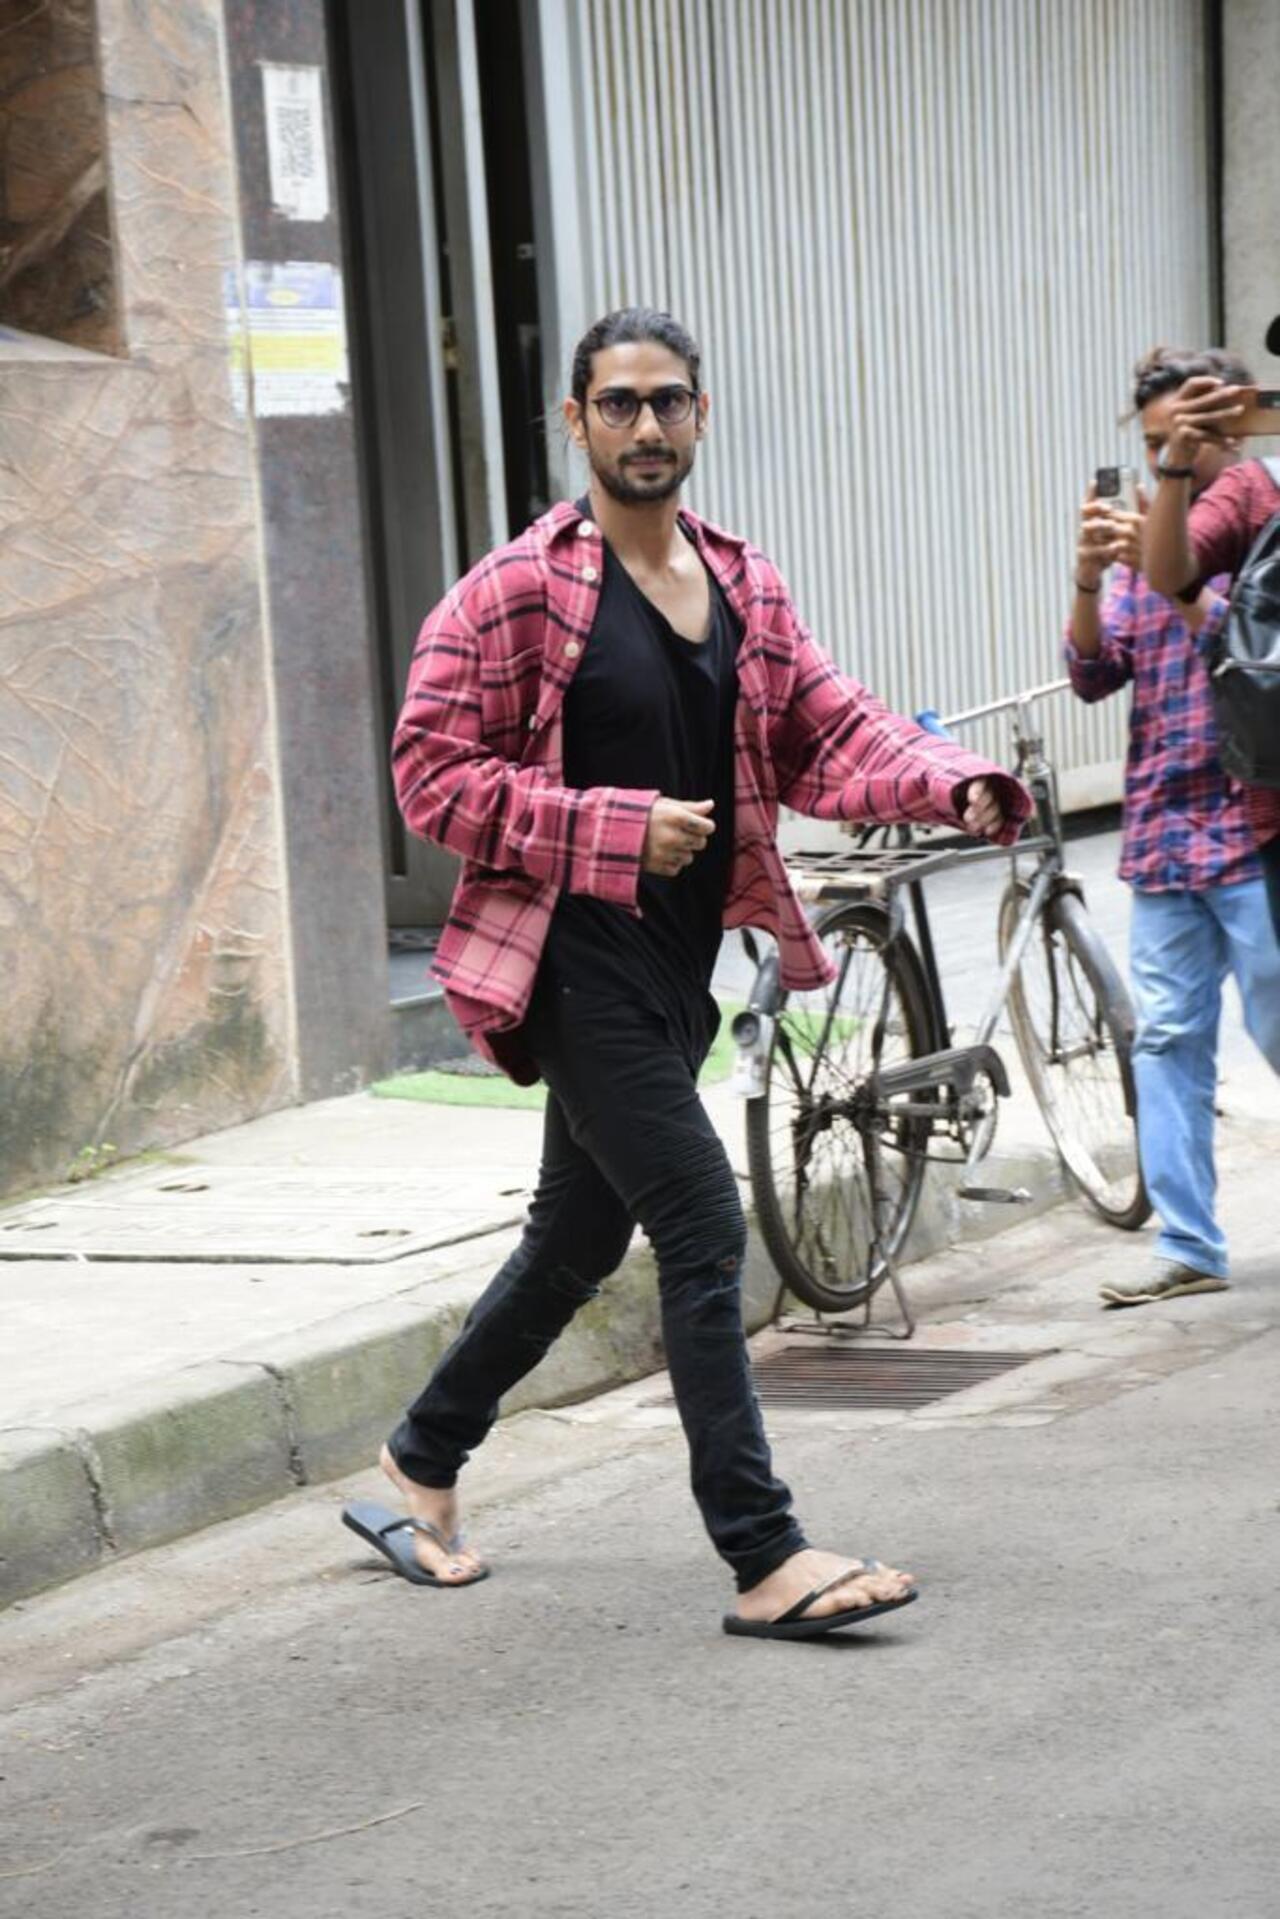 Prateik Babbar got clicked in the city. The actor was wearing a black T-shirt with matching jeans paired with a pink shirt